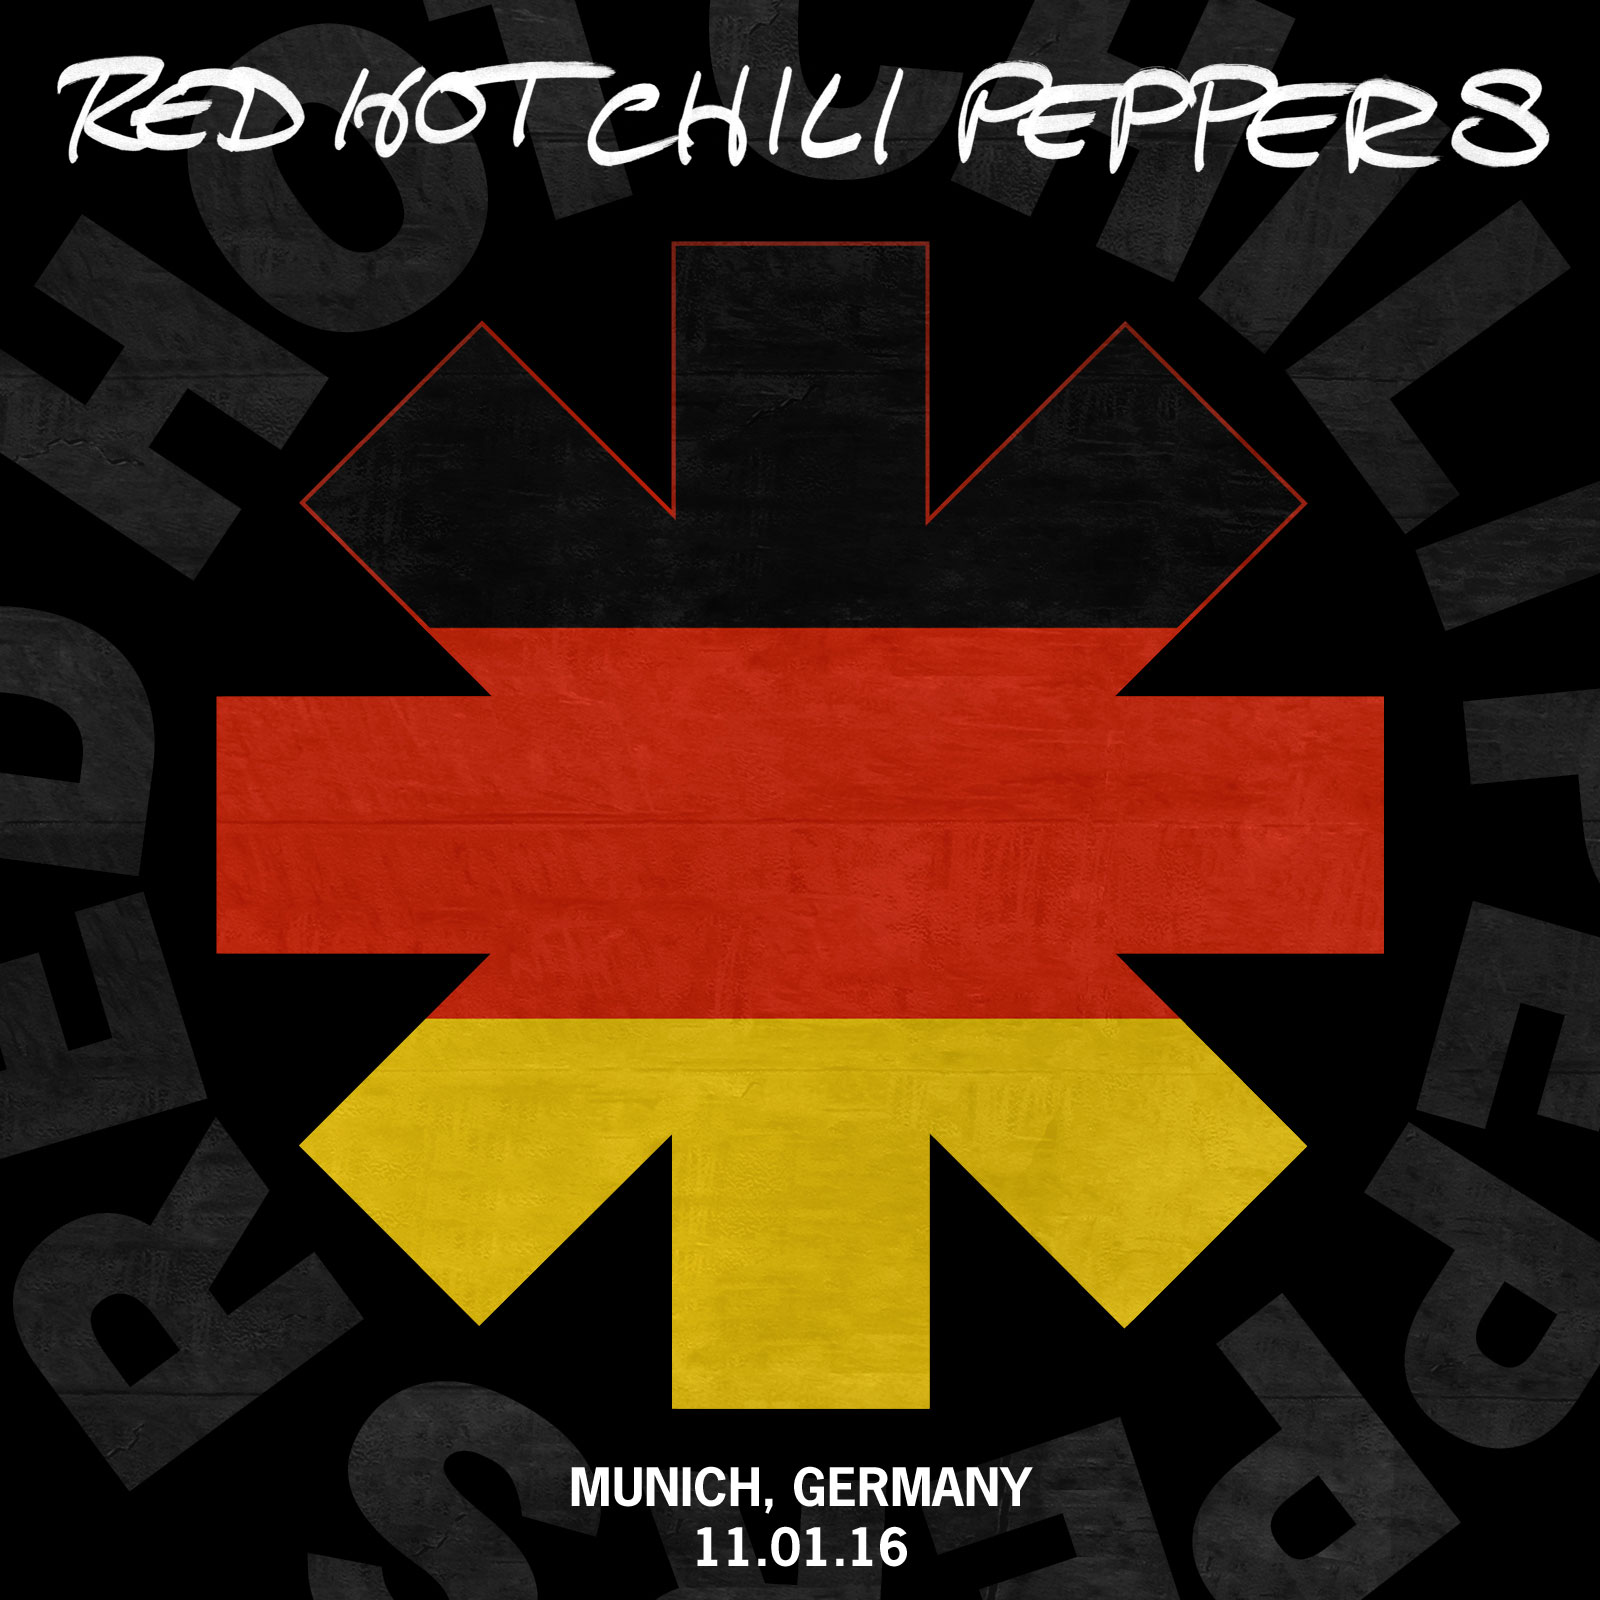 Red Hot Chili Peppers Münich 2016